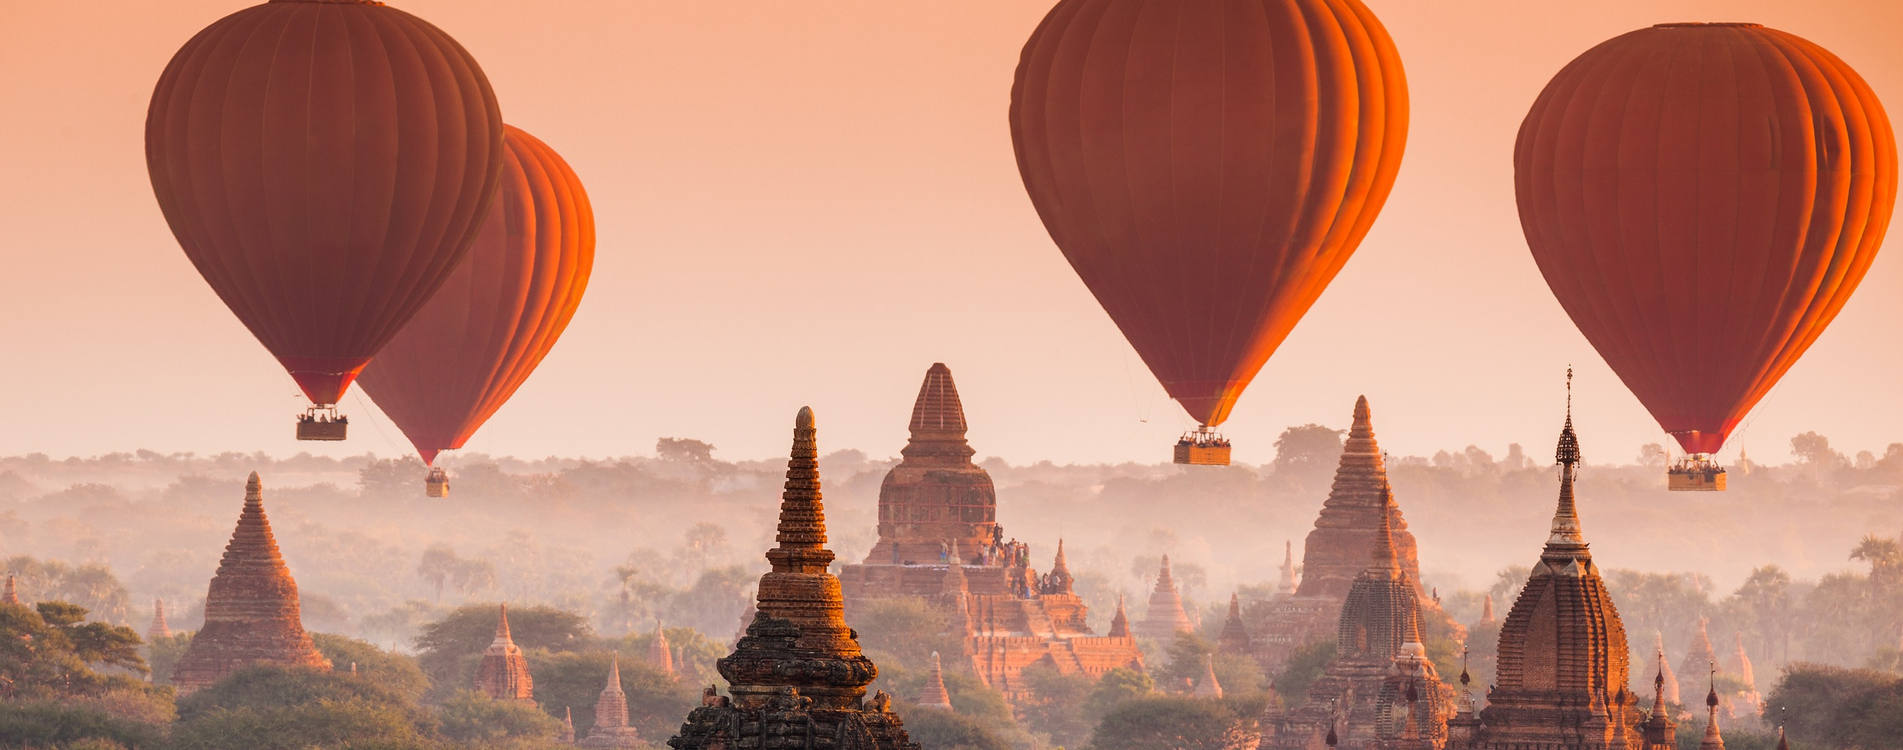 17-Day Private tour to Myanmar, Vietnam and Laos